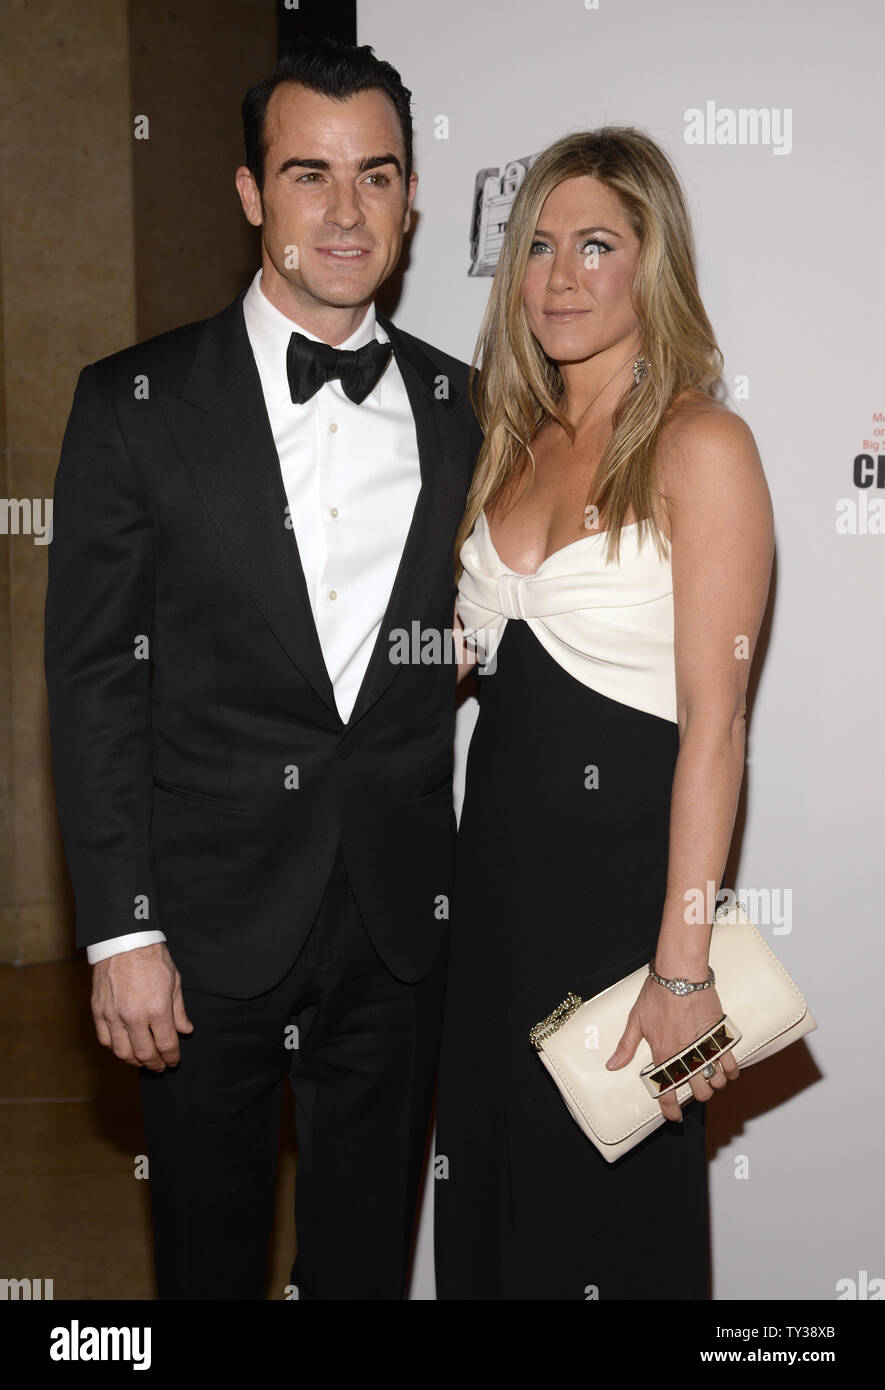 Actor Justin Theroux (L) and actress Jennifer Aniston attend the the 2012 presentation of the American Cinematheque Award held at the Beverly Hilton Hotel in Beverly Hills, California on November 15, 2012.      UPI/Phil McCarten Stock Photo